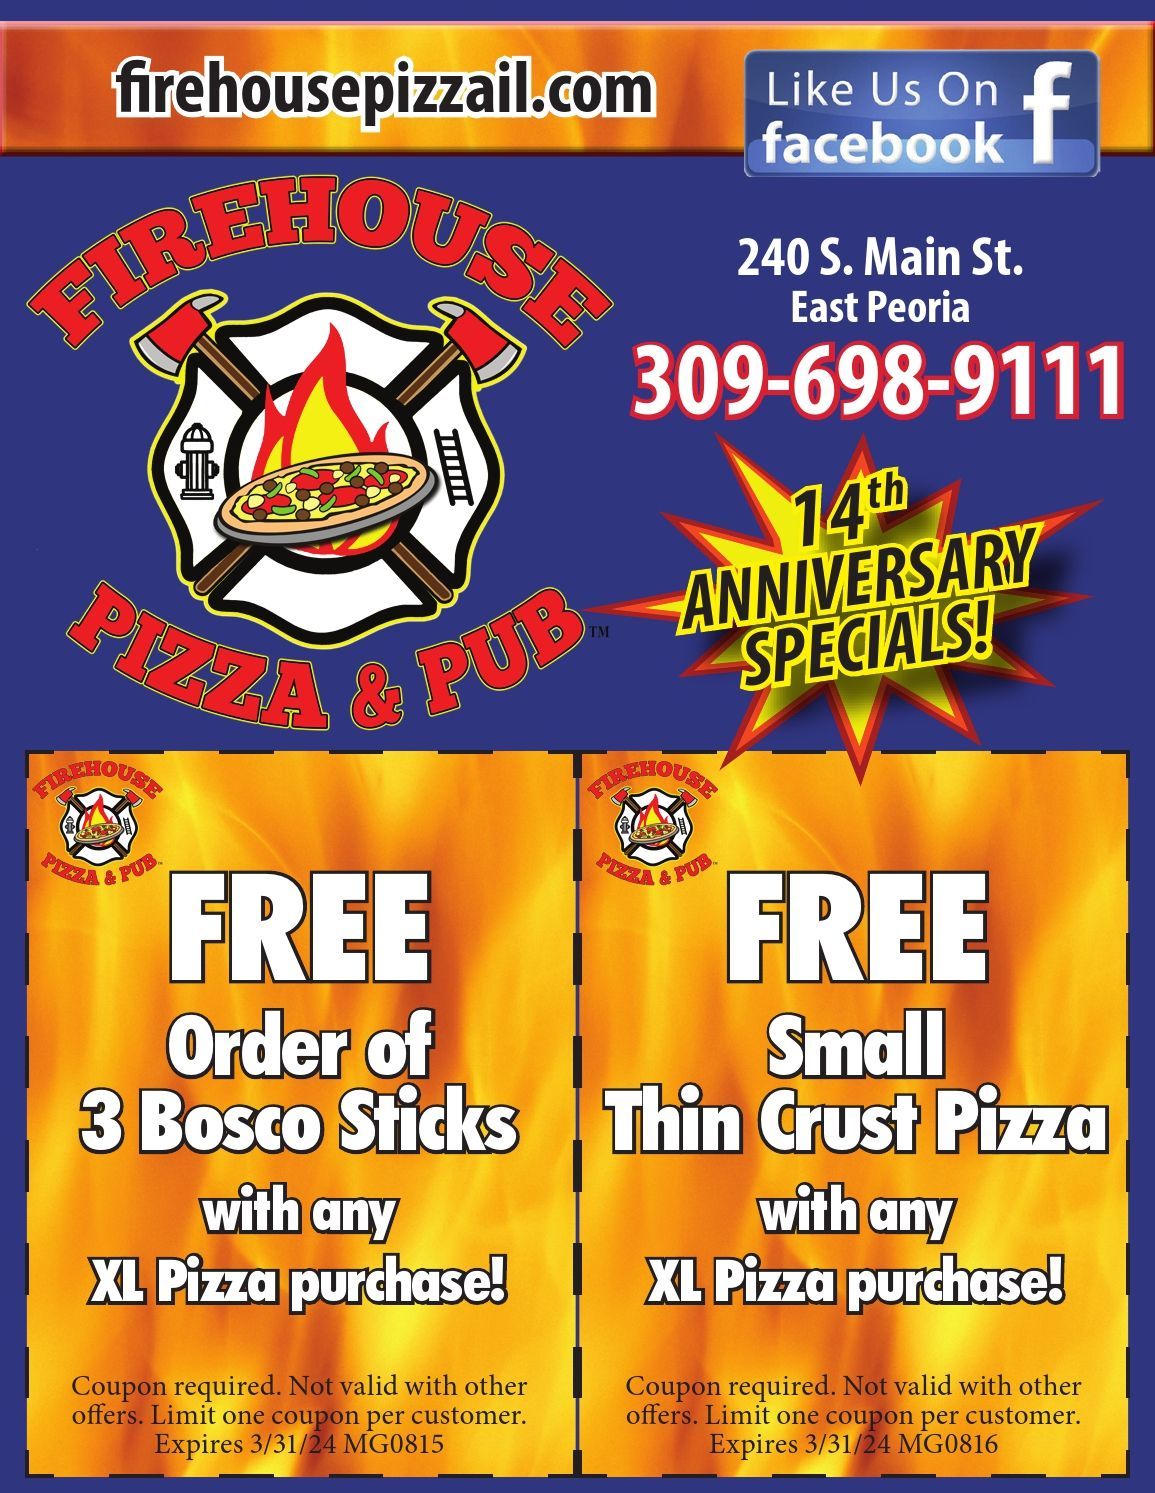 Firehouse Pizza and Pub FREE Bosco Sticks coupon and FREE PIZZA coupon East Peoria, IL